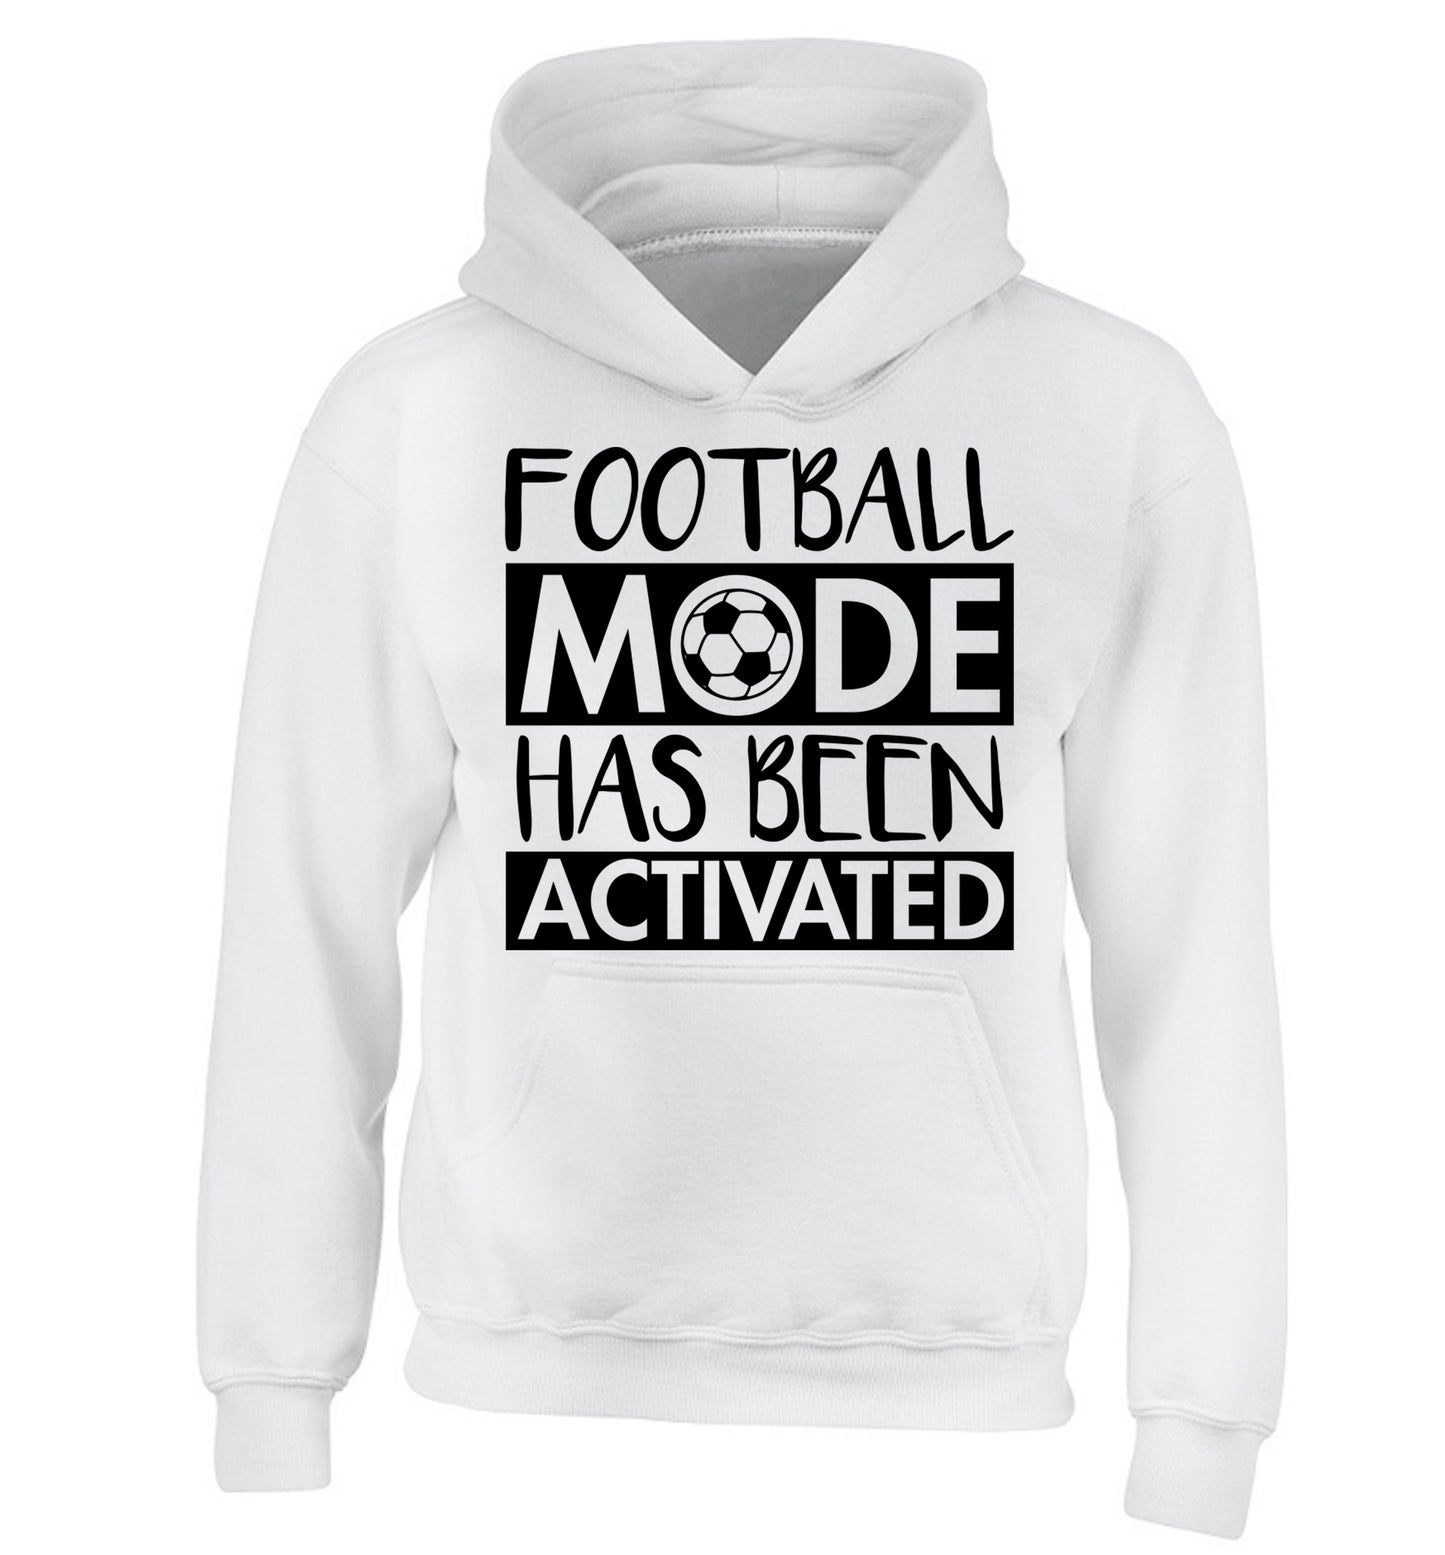 Football mode has been activated children's white hoodie 12-14 Years